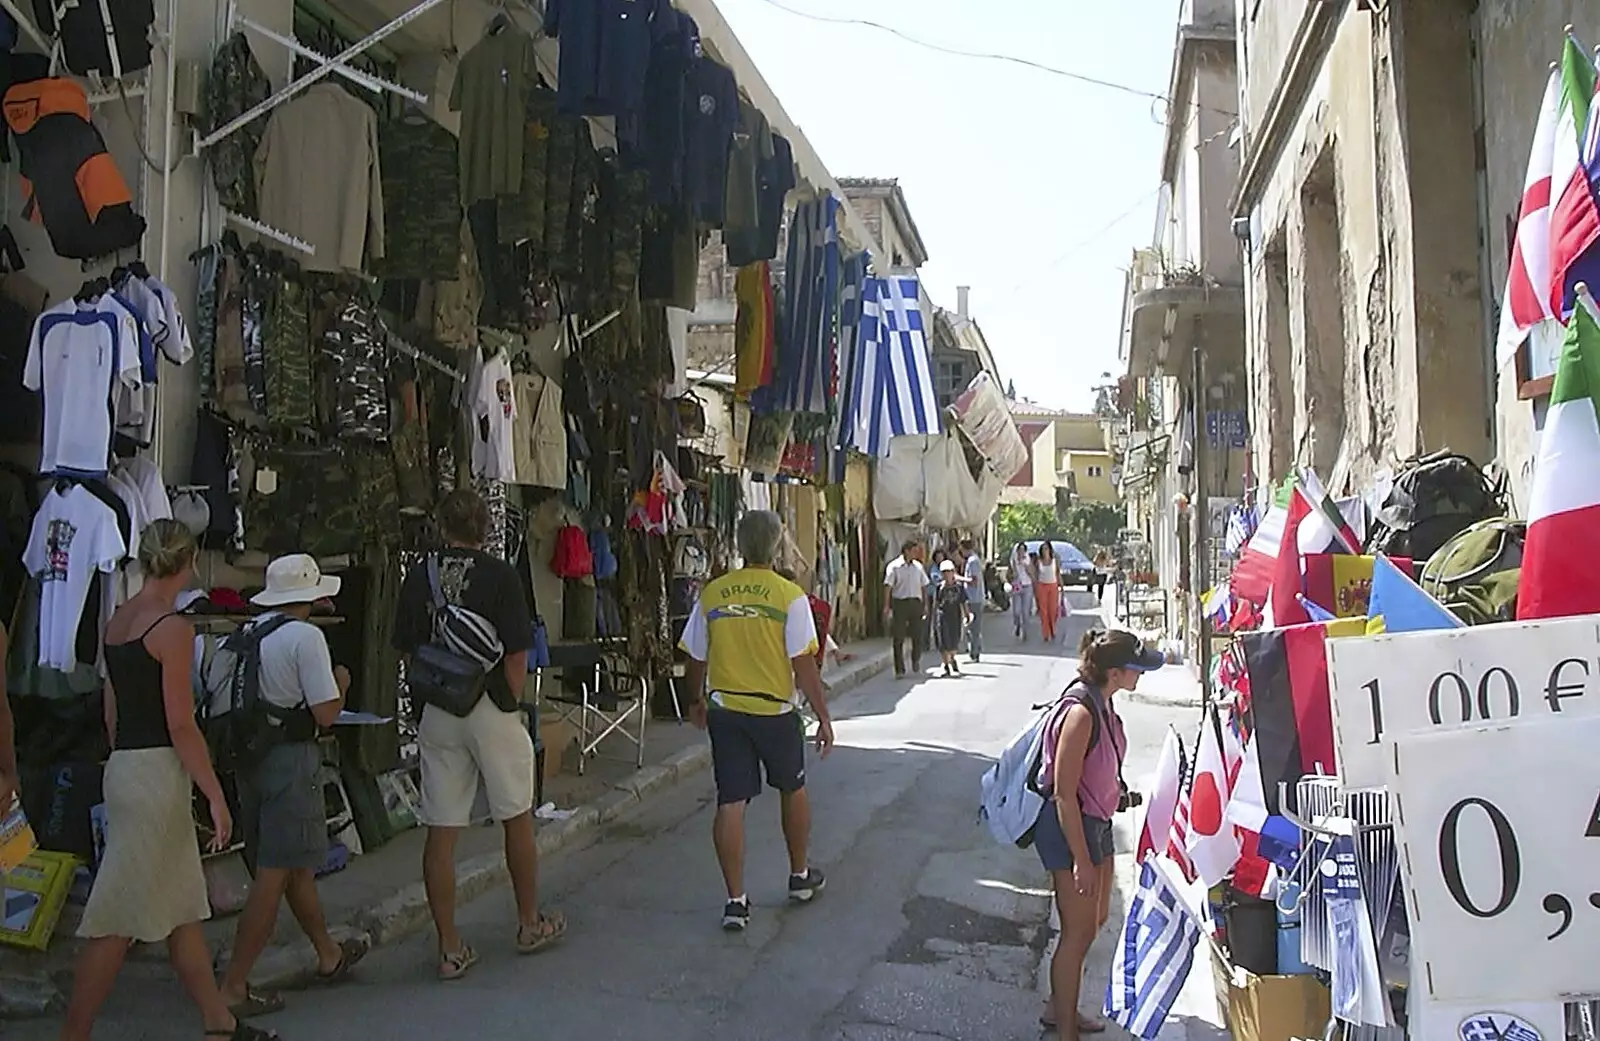 Another souvenir street, from A Postcard From Athens: A Day Trip to the Olympics, Greece - 19th August 2004